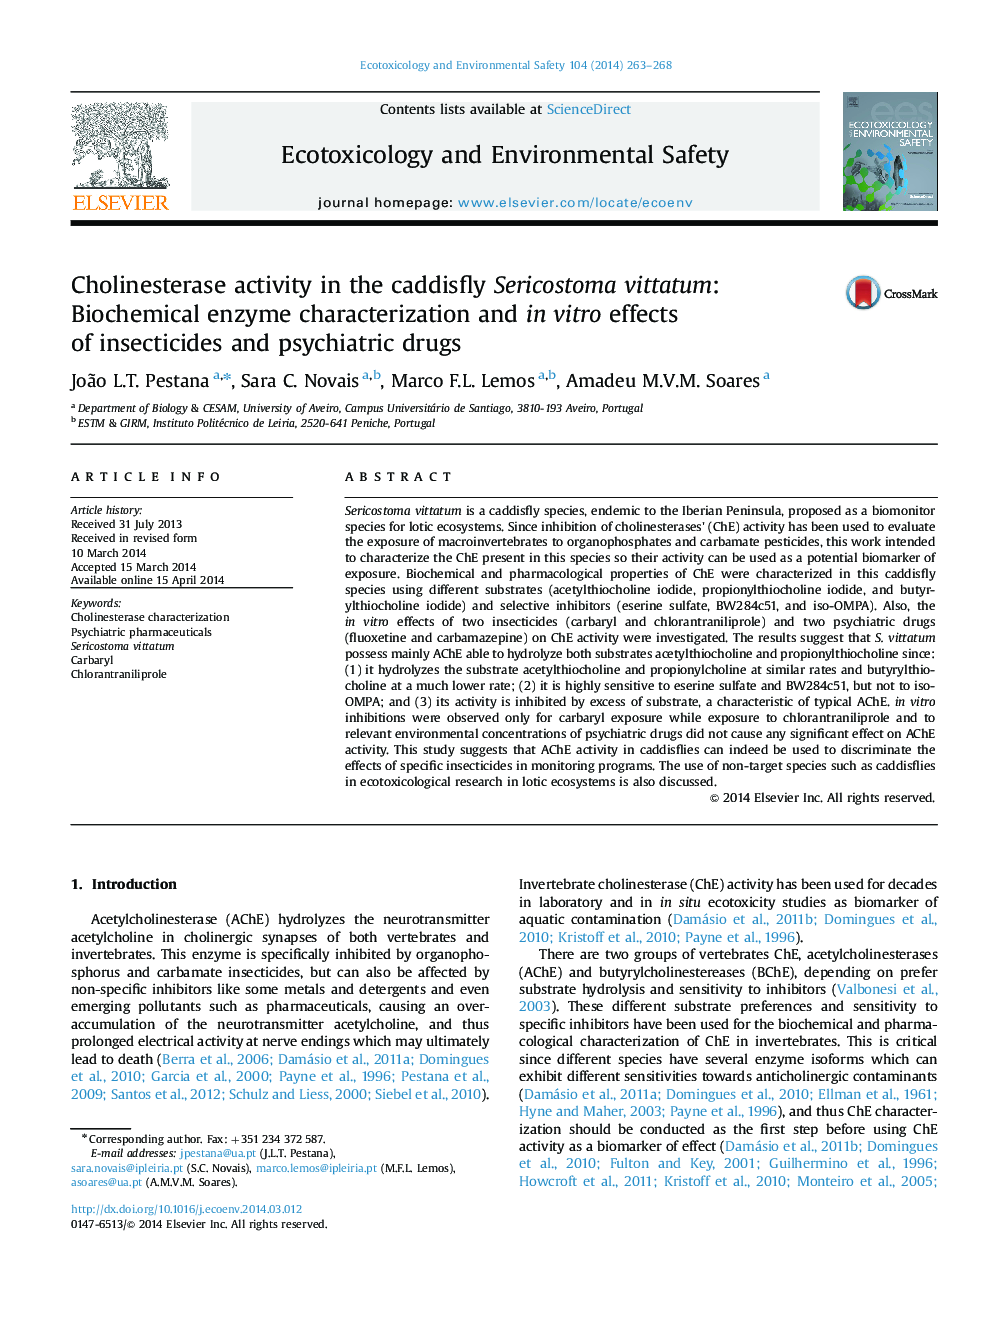 Cholinesterase activity in the caddisfly Sericostoma vittatum: Biochemical enzyme characterization and in vitro effects of insecticides and psychiatric drugs